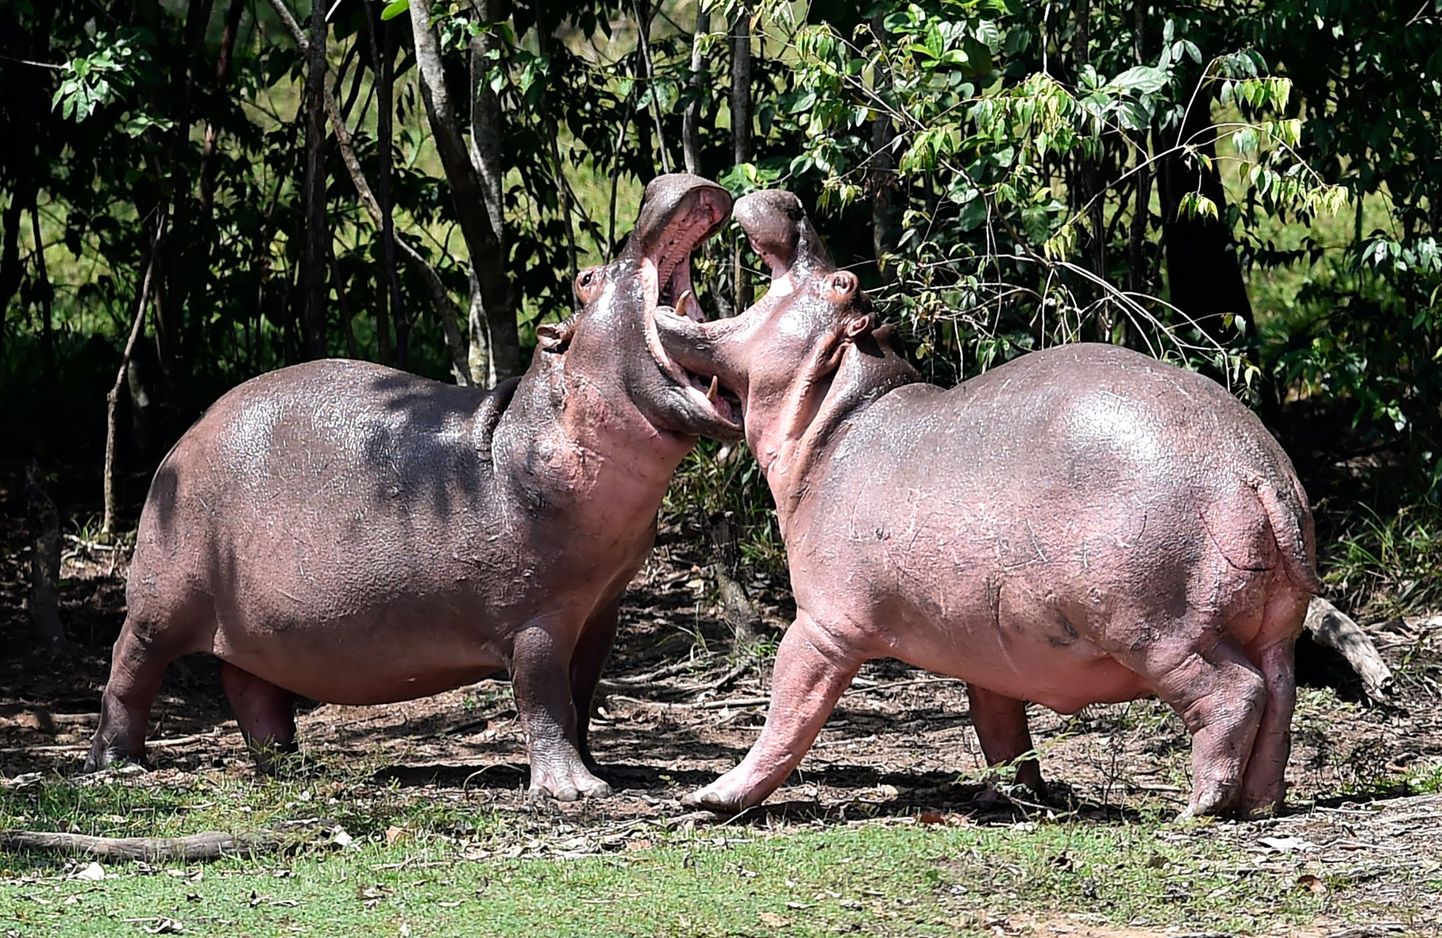 Hippos are seen at the Hacienda Napoles theme park, once the private zoo of drug kingpin Pablo Escobar at his Napoles ranch, in Doradal, Antioquia department, Colombia on September  12, 2020. - Escobar bought four hippos from a zoo in California and flew them to his ranch in the early 1980s. Left to themselves on his Napoles Estate, they bred to become supposedly the biggest wild hippo herd outside Africa -- a local curiosity and a hazard. (Photo by Raul ARBOLEDA / AFP)